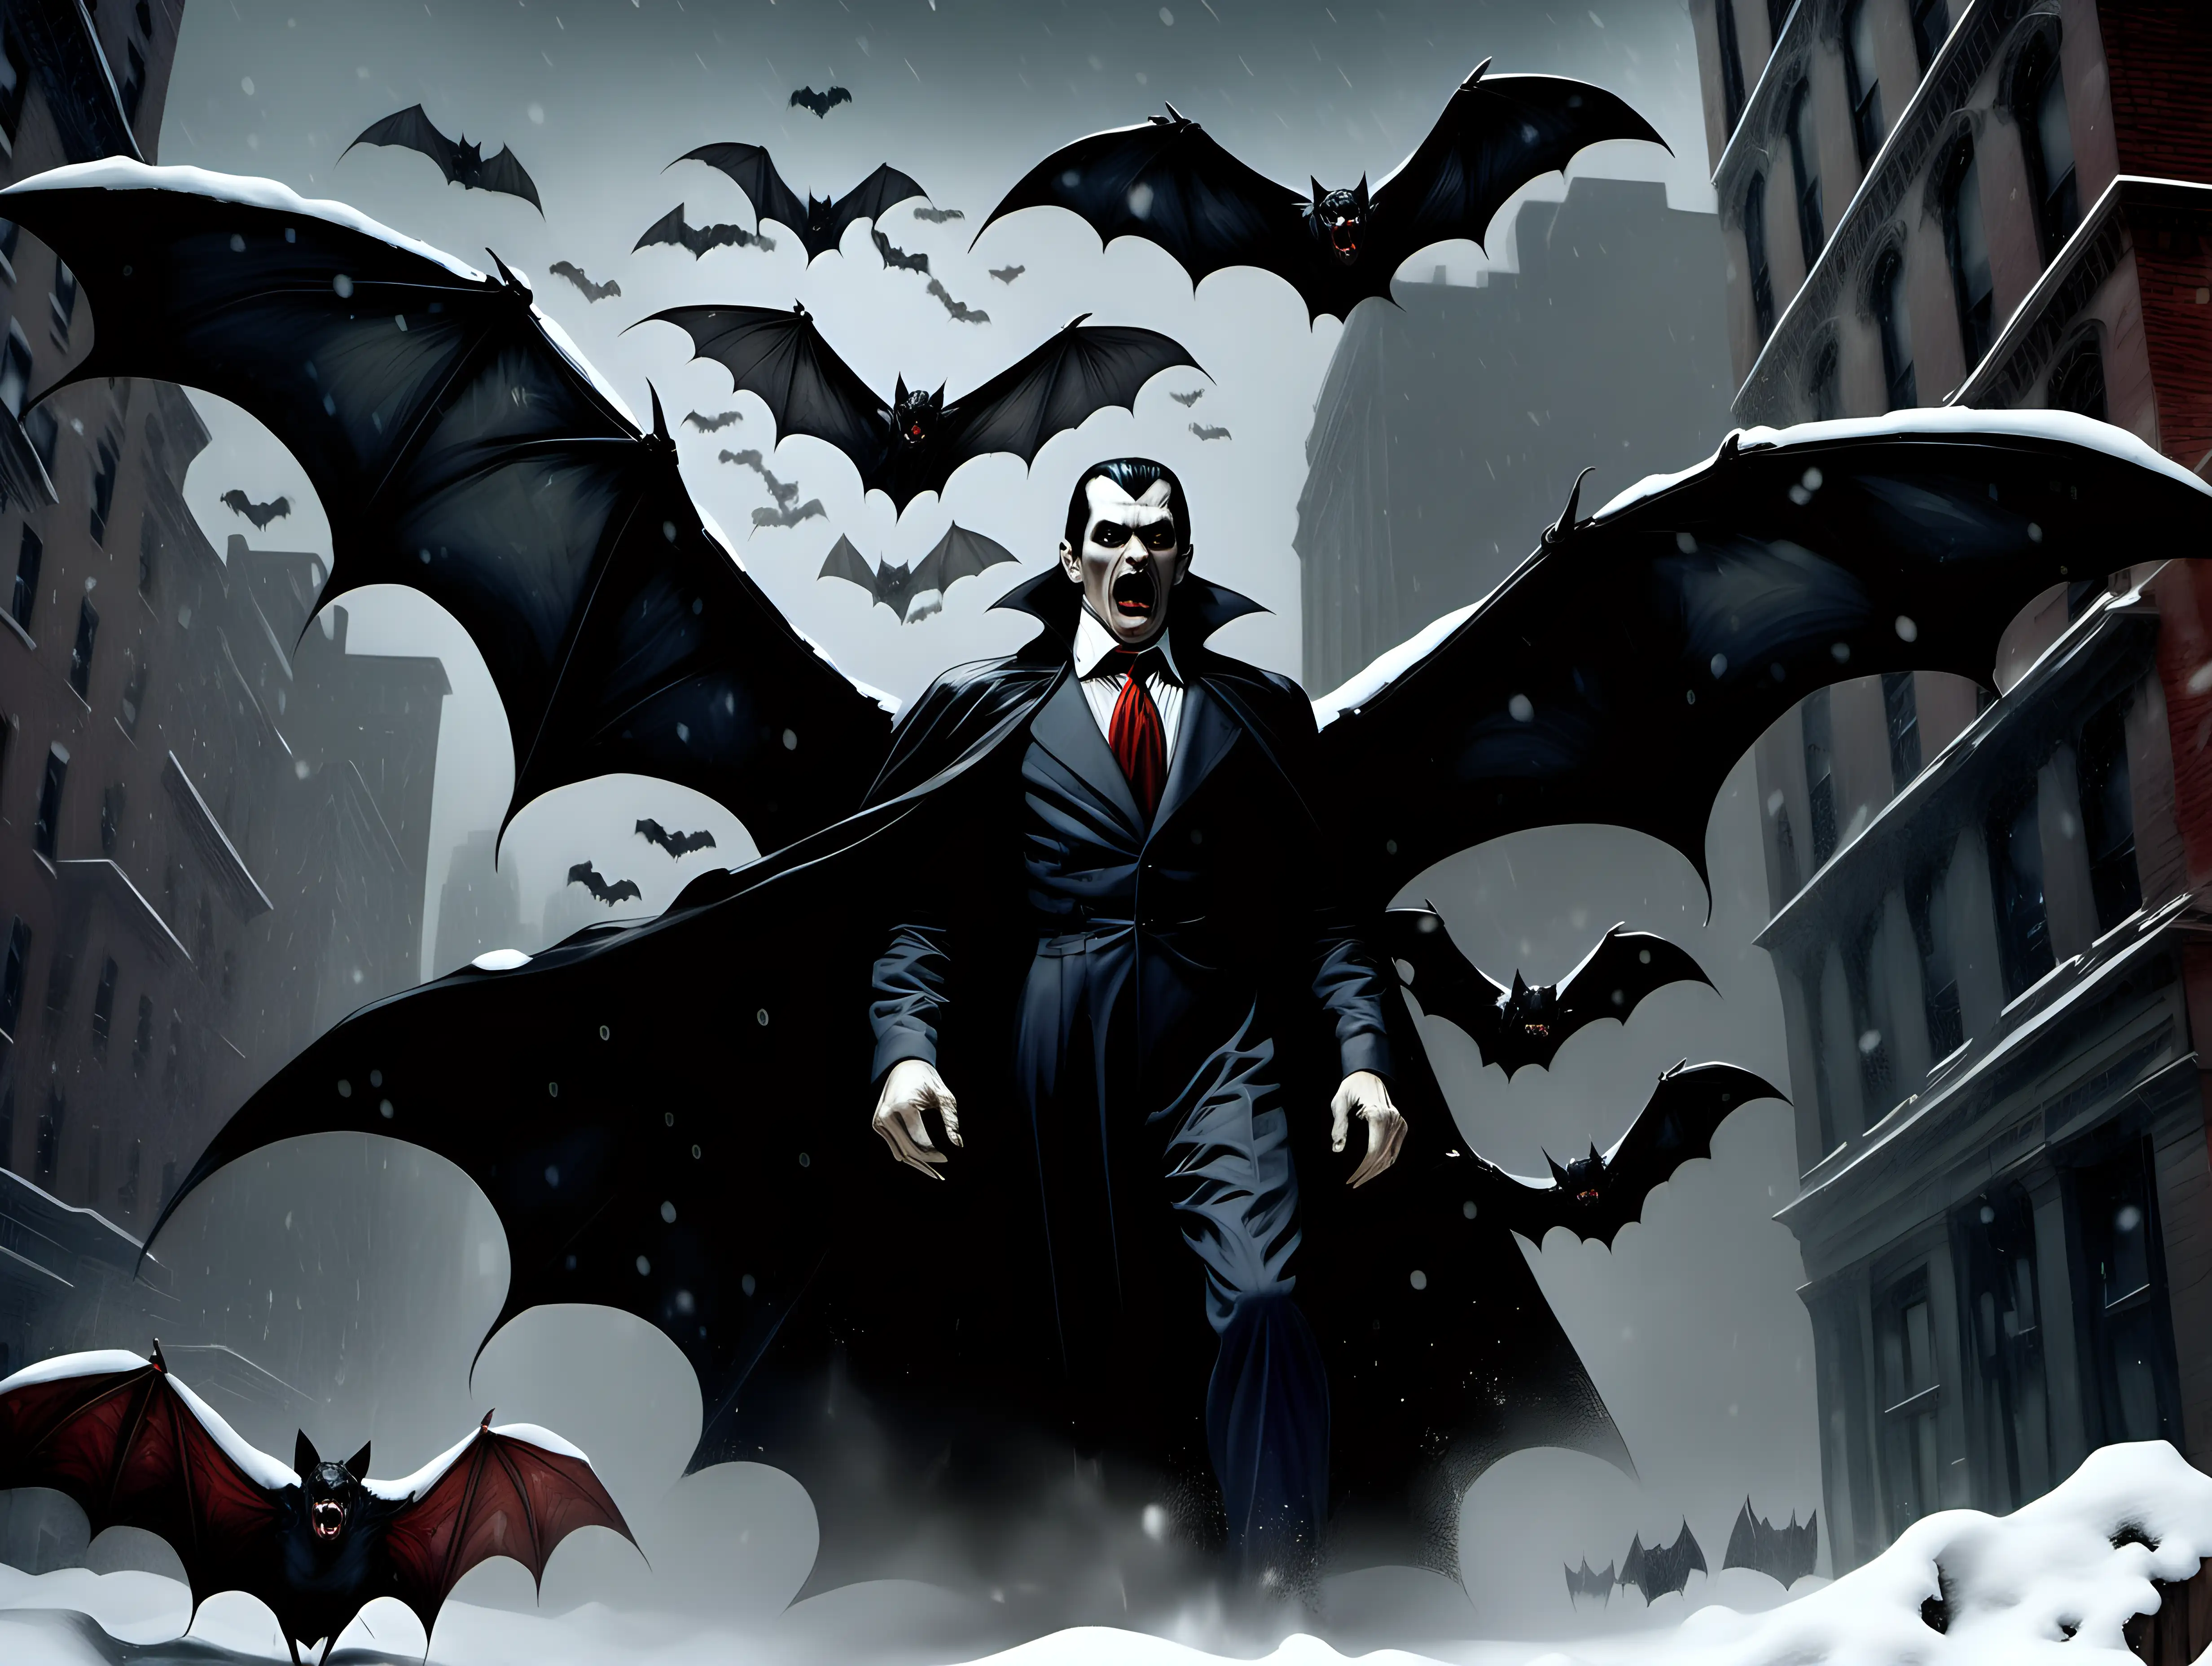 Dracula and Vampire Bats in NYC Snow Blizzard Realism by Frazetta and Leibovitz